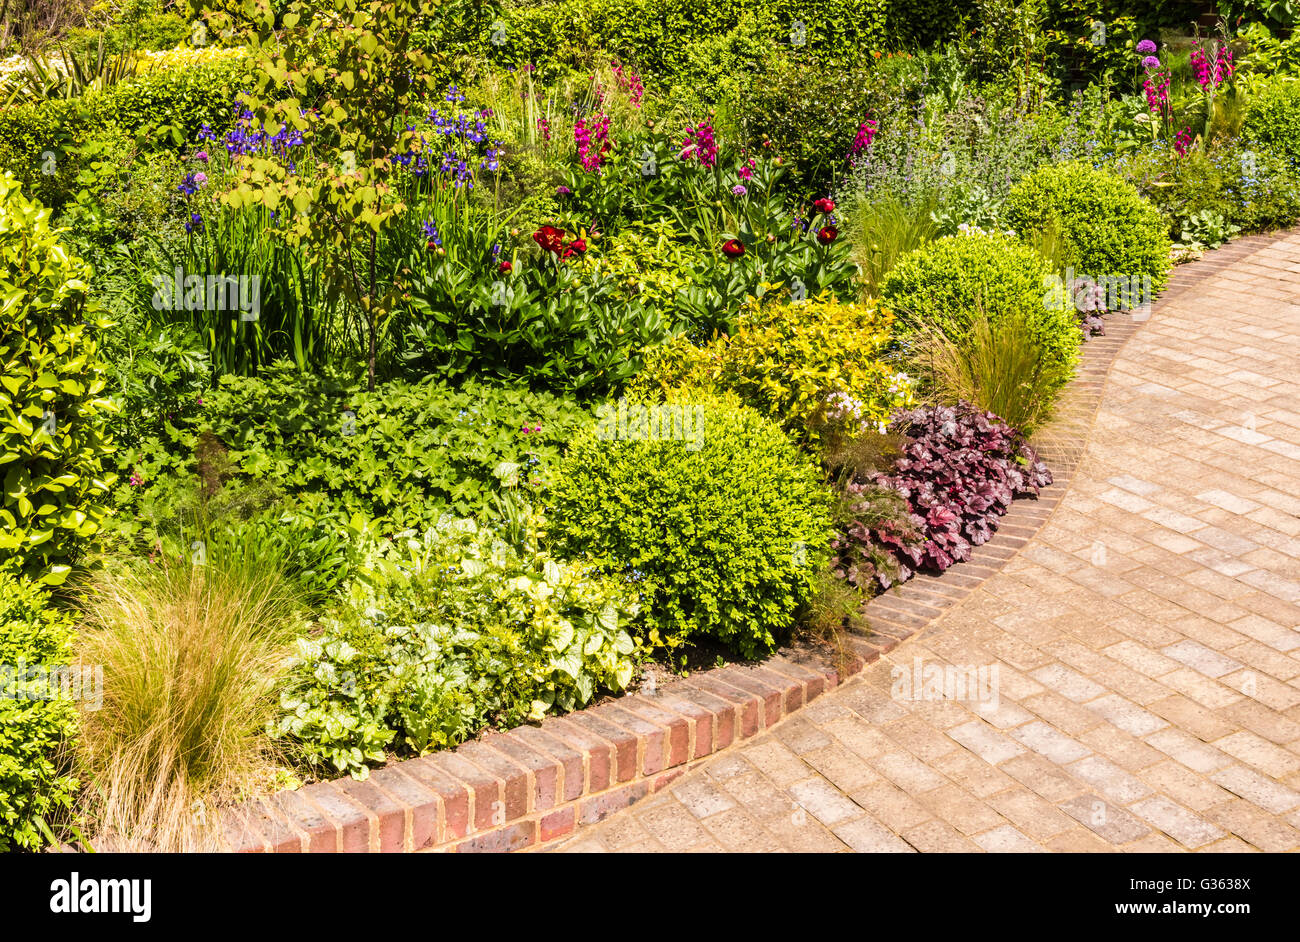 Wonderfully colourful flower display caught in the spring sun of a north London garden, UK. Stock Photo